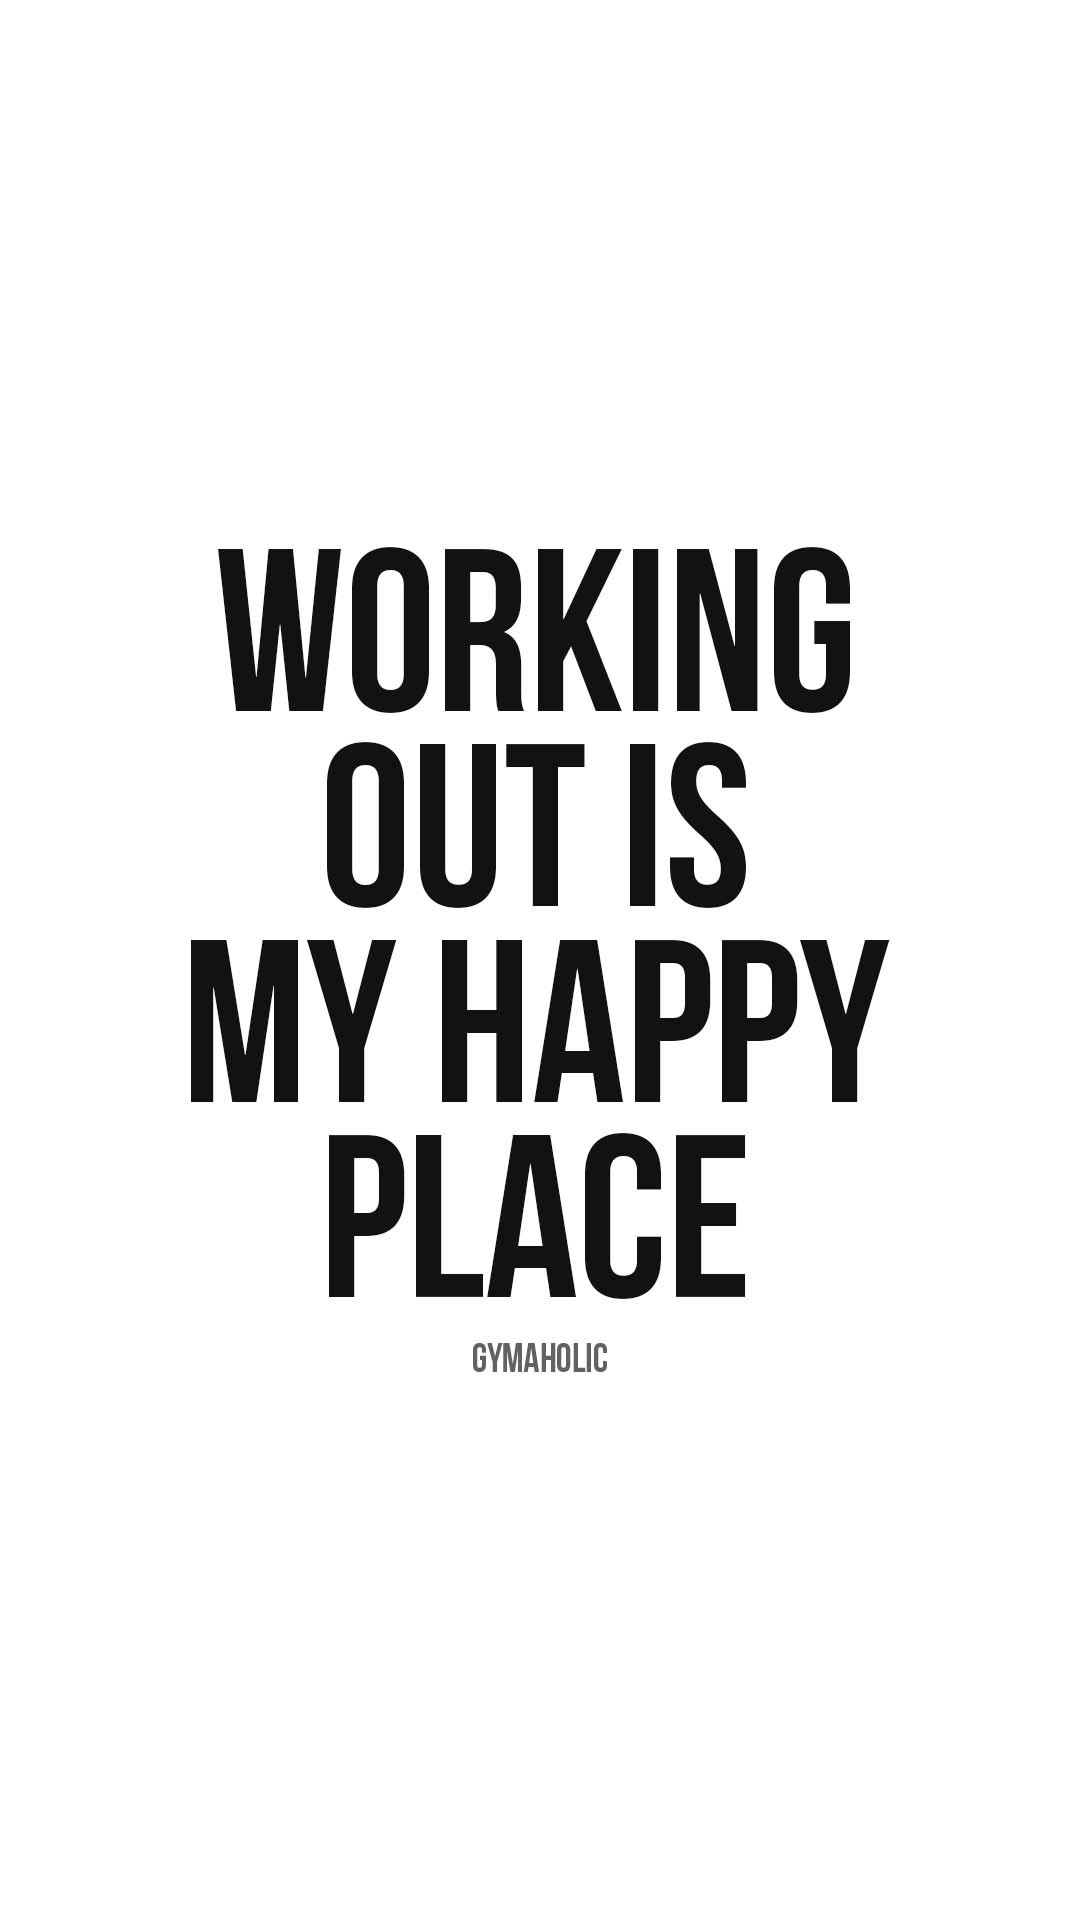 Working out is my happy place